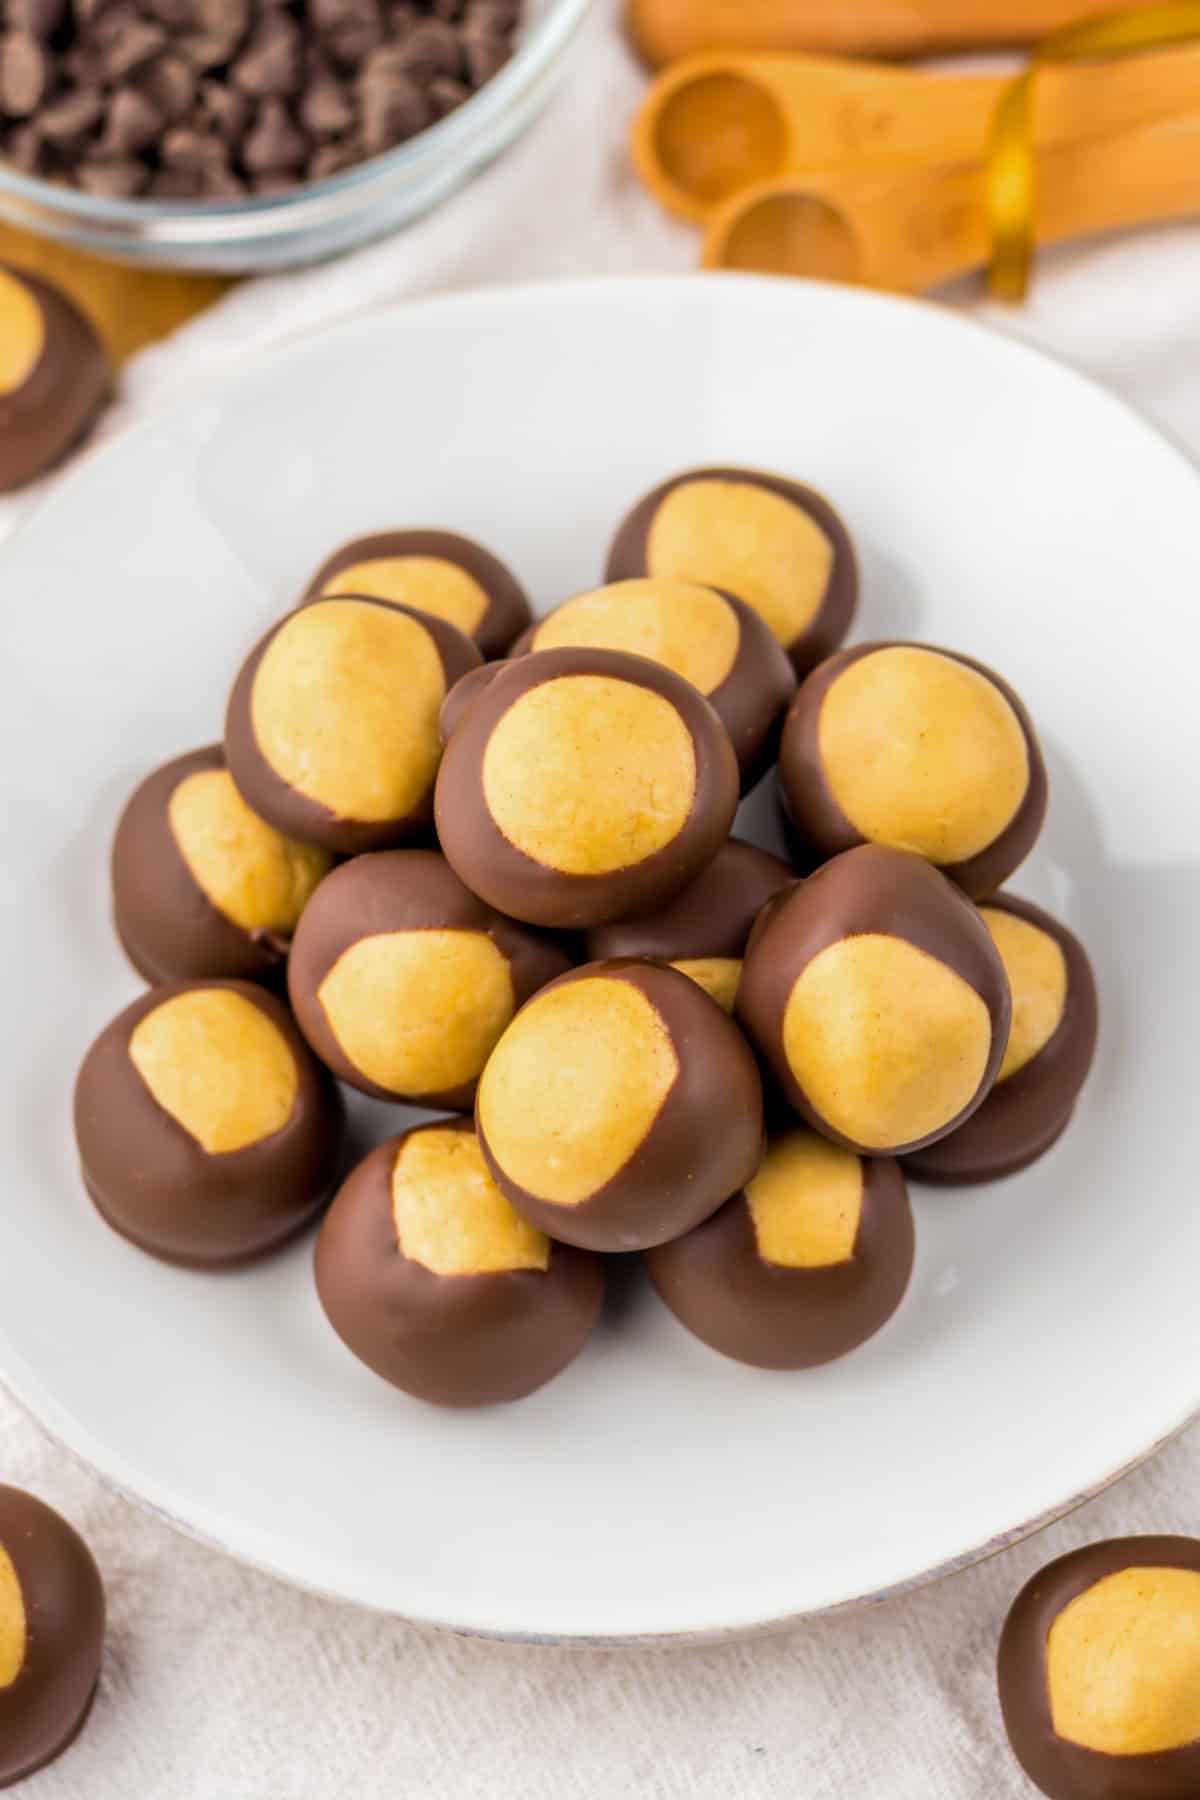 Overhead image of buckeye chocolate covered peanut butter balls served on a white plate.